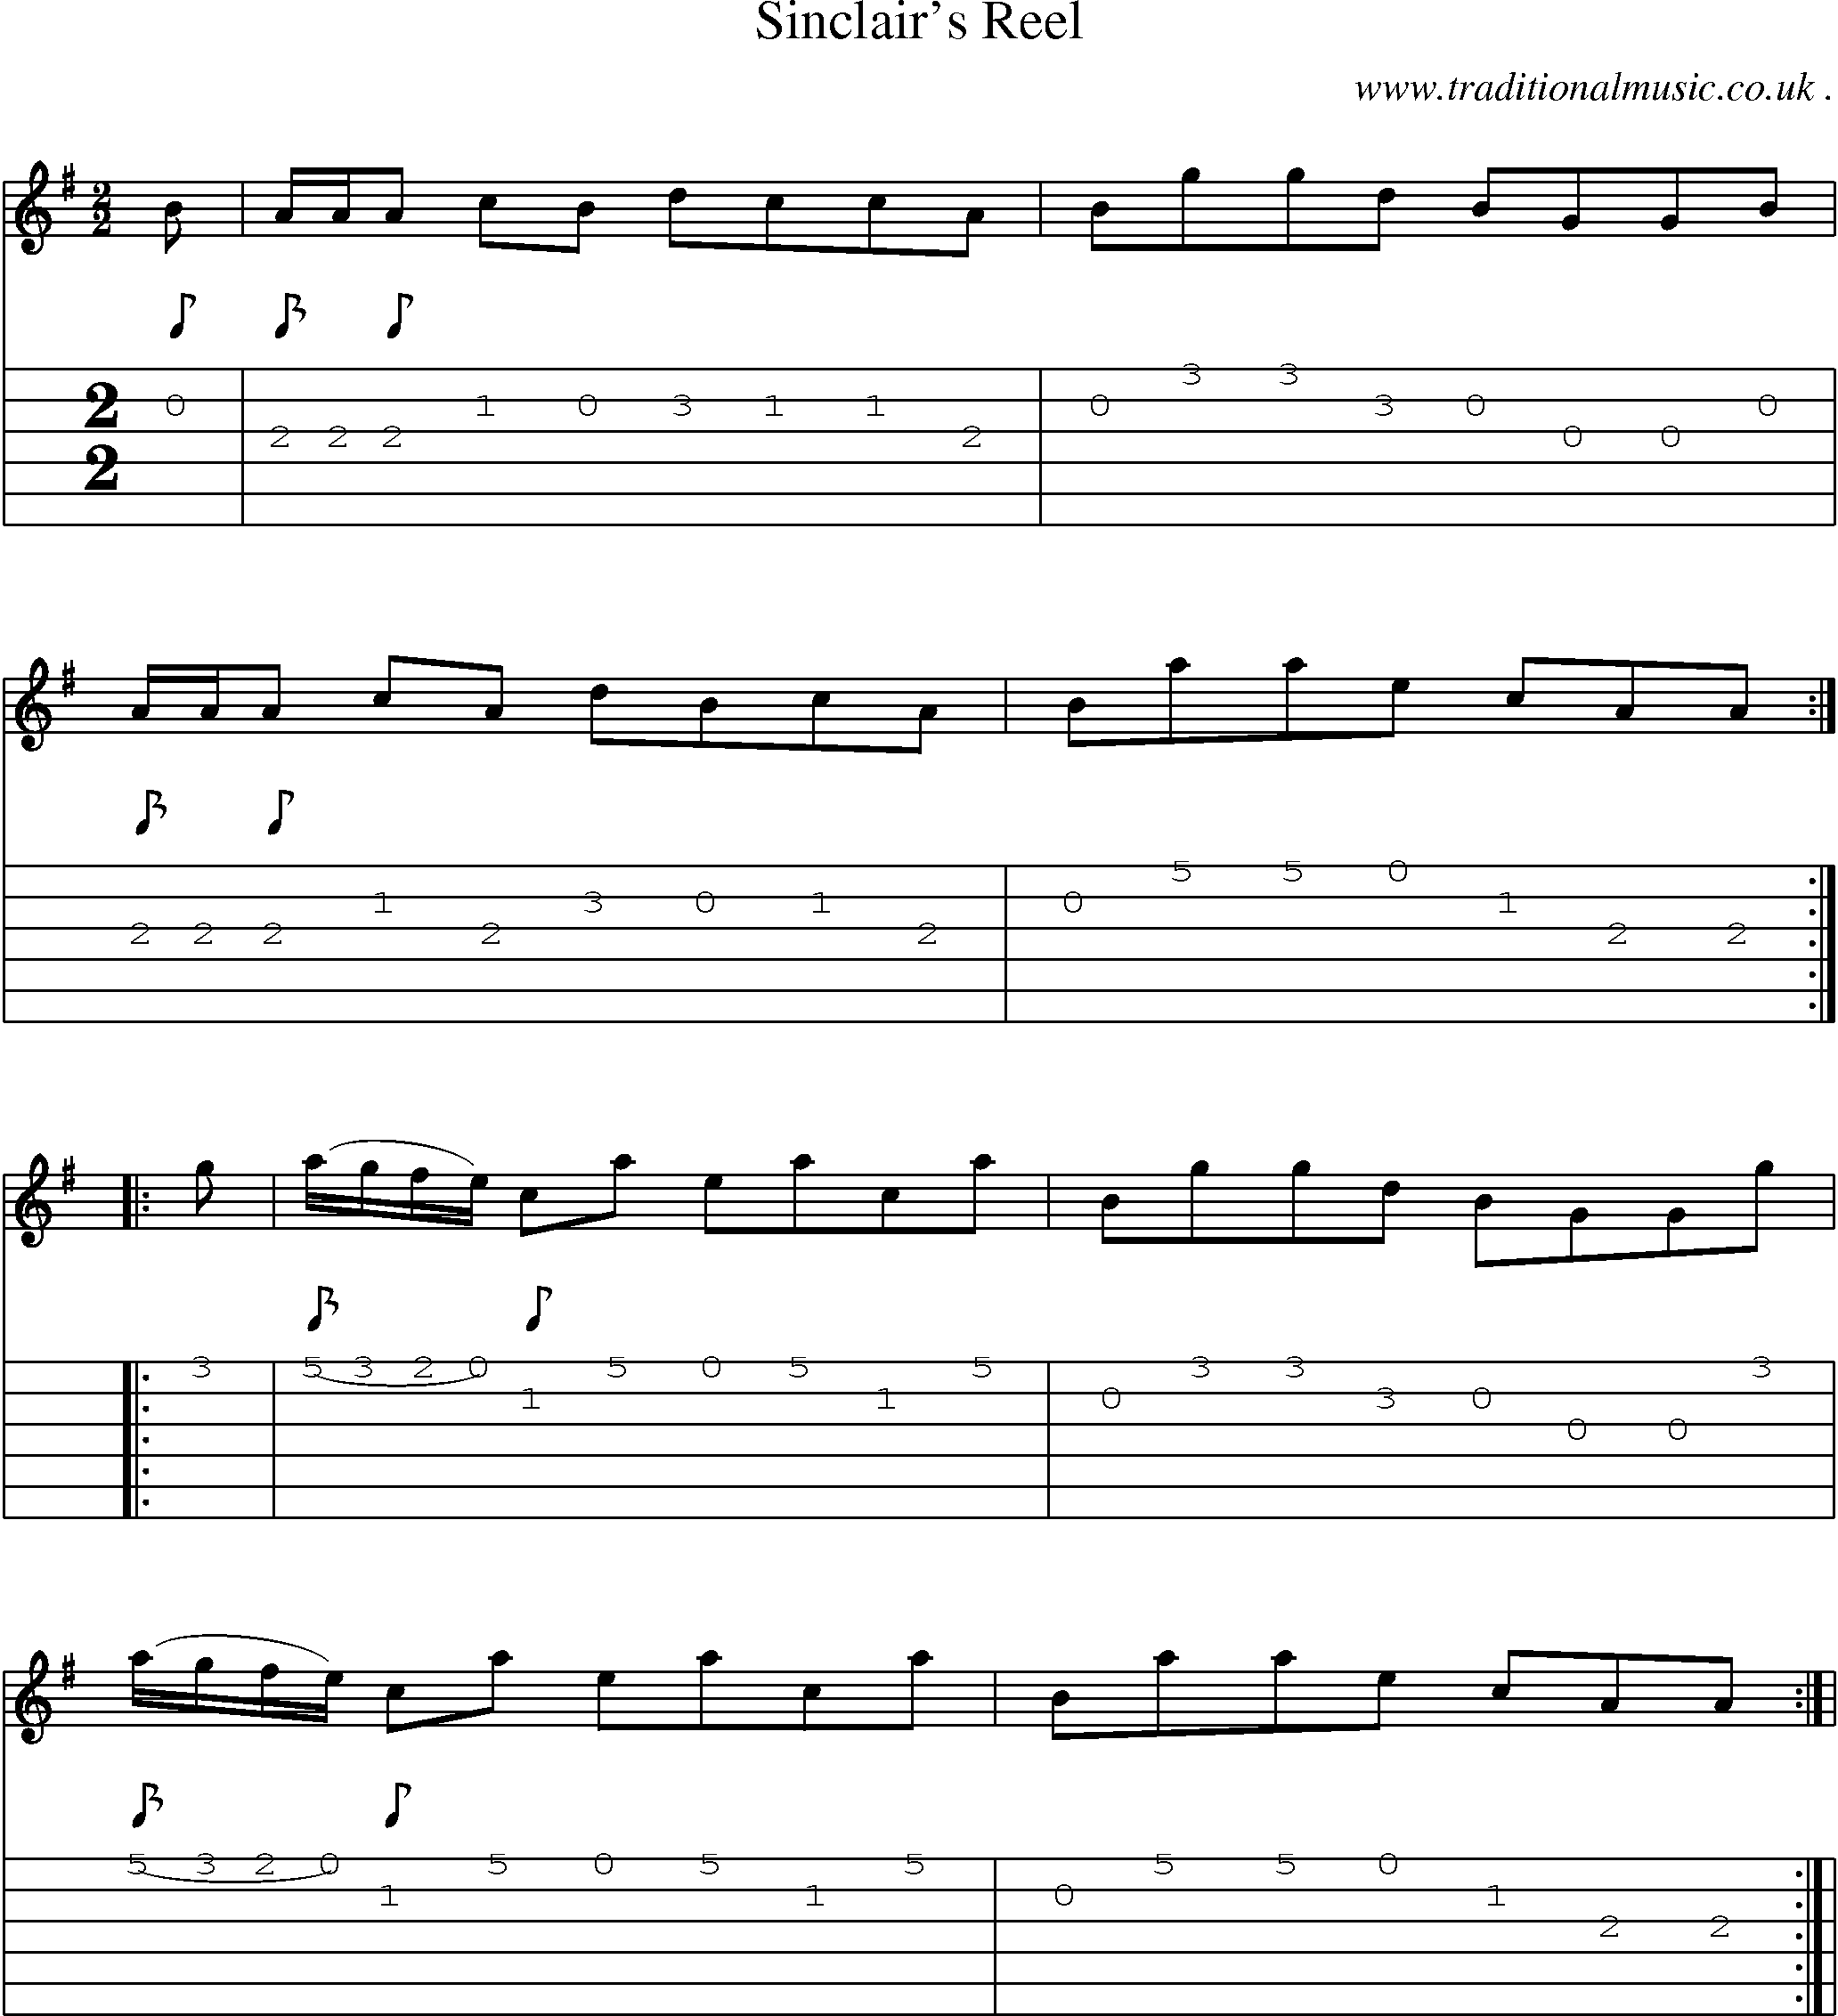 Sheet-Music and Guitar Tabs for Sinclair Reel